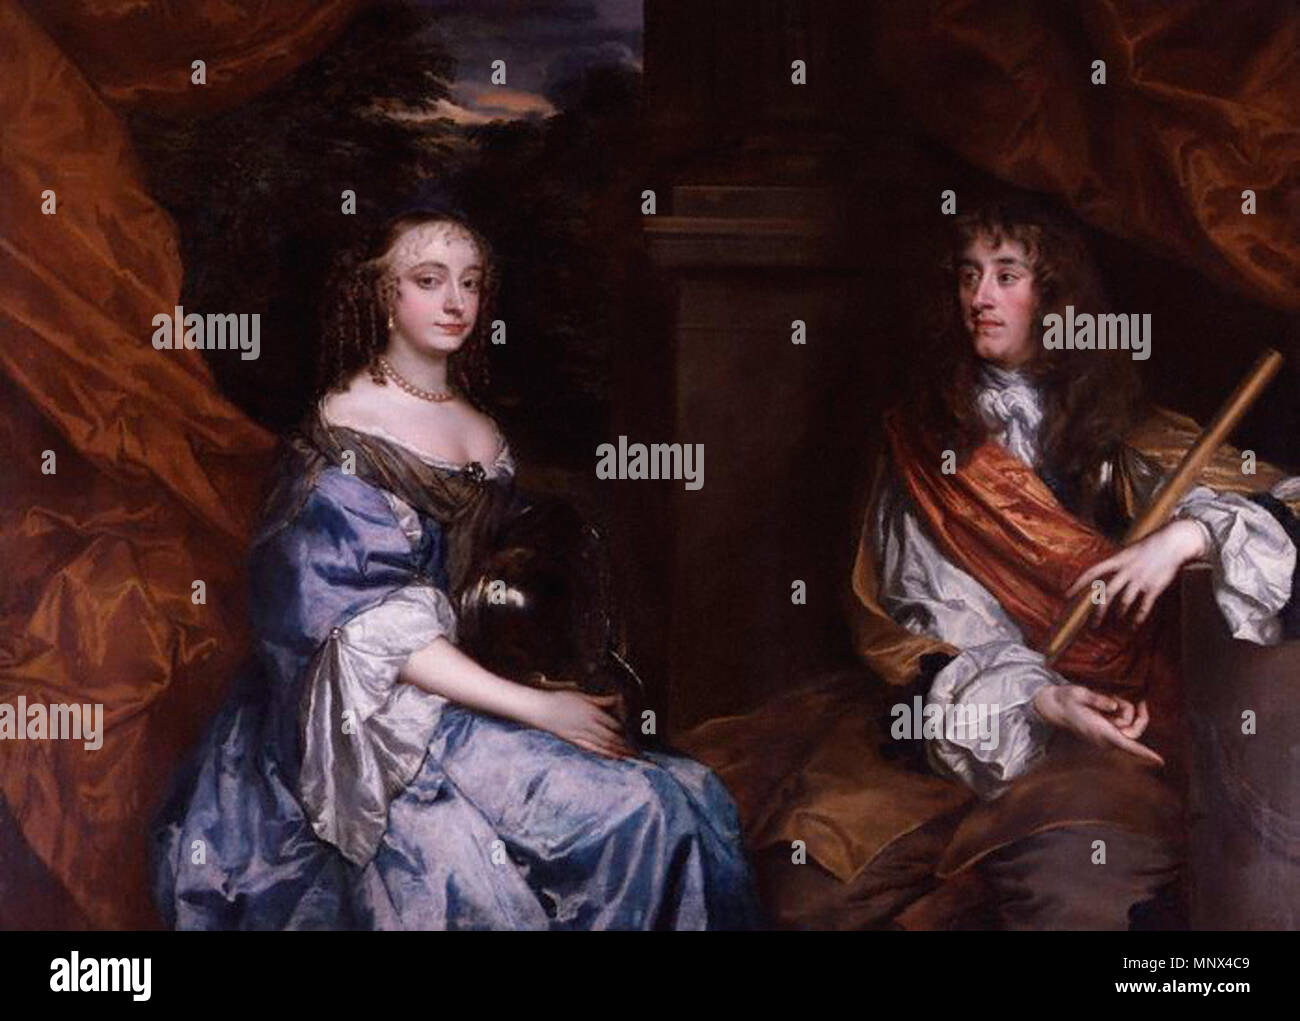 by Sir Peter Lely,painting,1660s   English: James Stuart, Duke of York and later King of England with his first wife, Anne Hyde Italiano: Giacomo Stuart, duca di York e poi re d'Inghilterra con la prima moglie, Anna Hyde   1660s.   693 James II and Anne Hyde Stock Photo